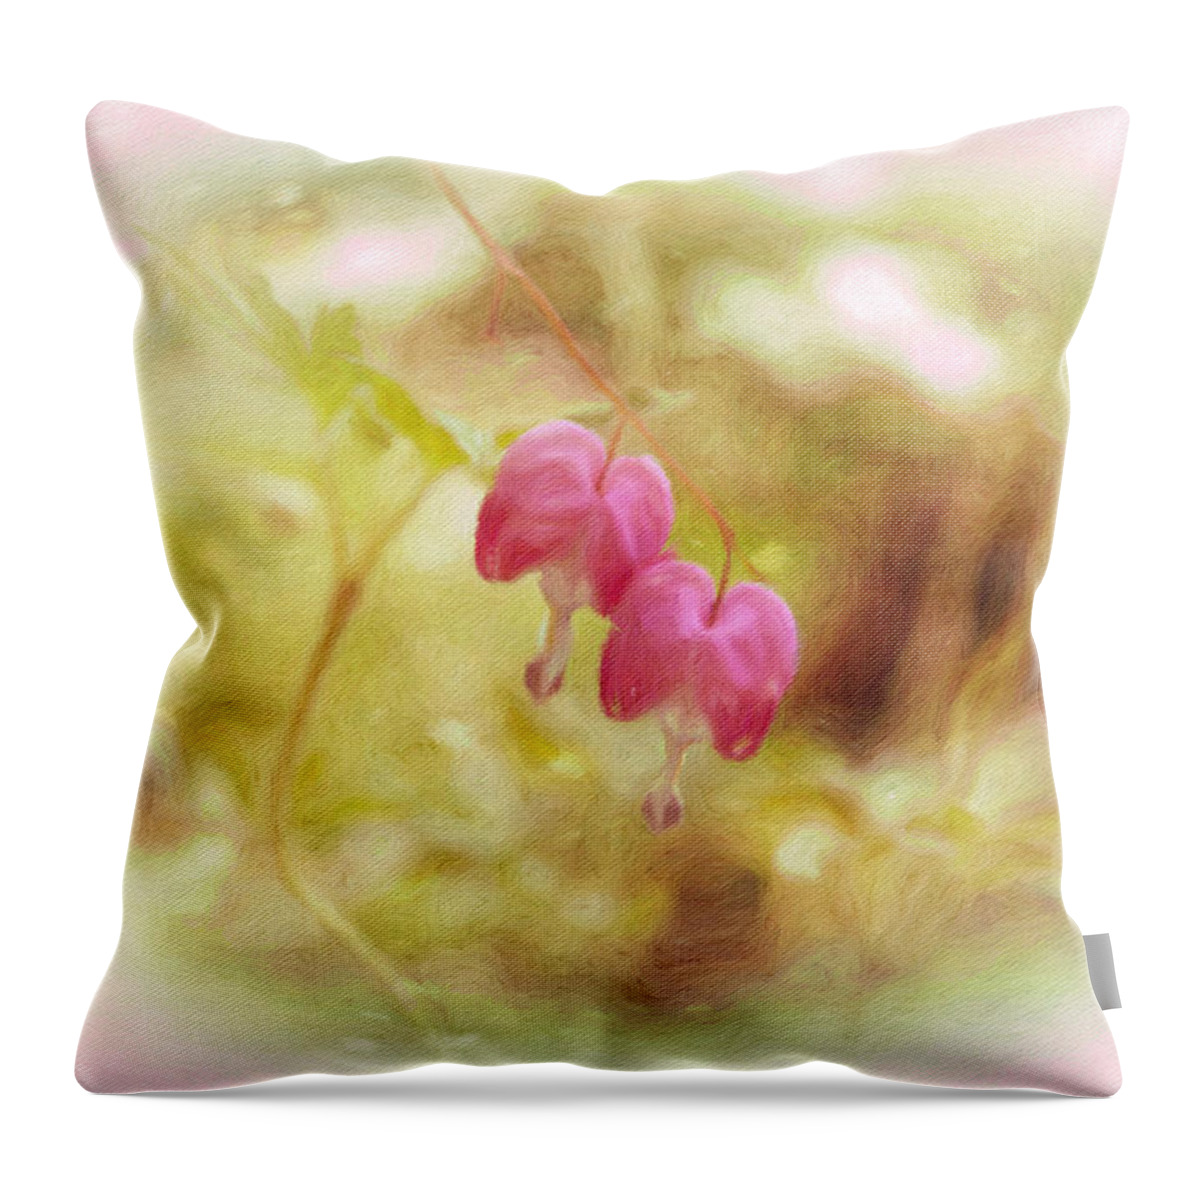 Flower Throw Pillow featuring the photograph Two Bleeding Hearts by Diane Lindon Coy